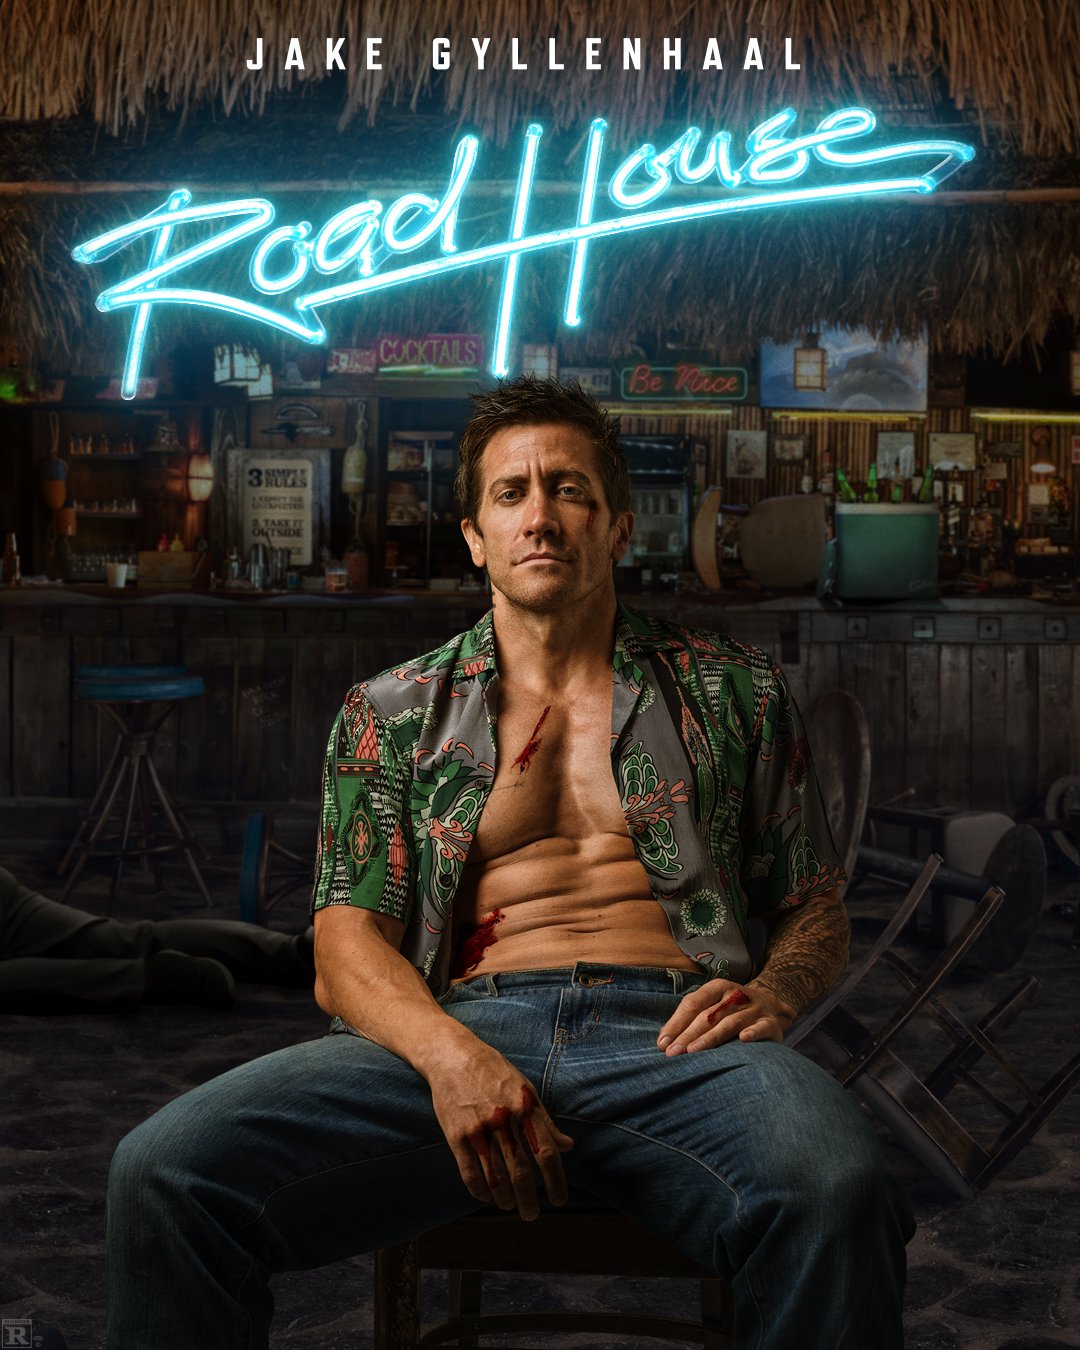 ROAD HOUSE (2024) — When To Stream